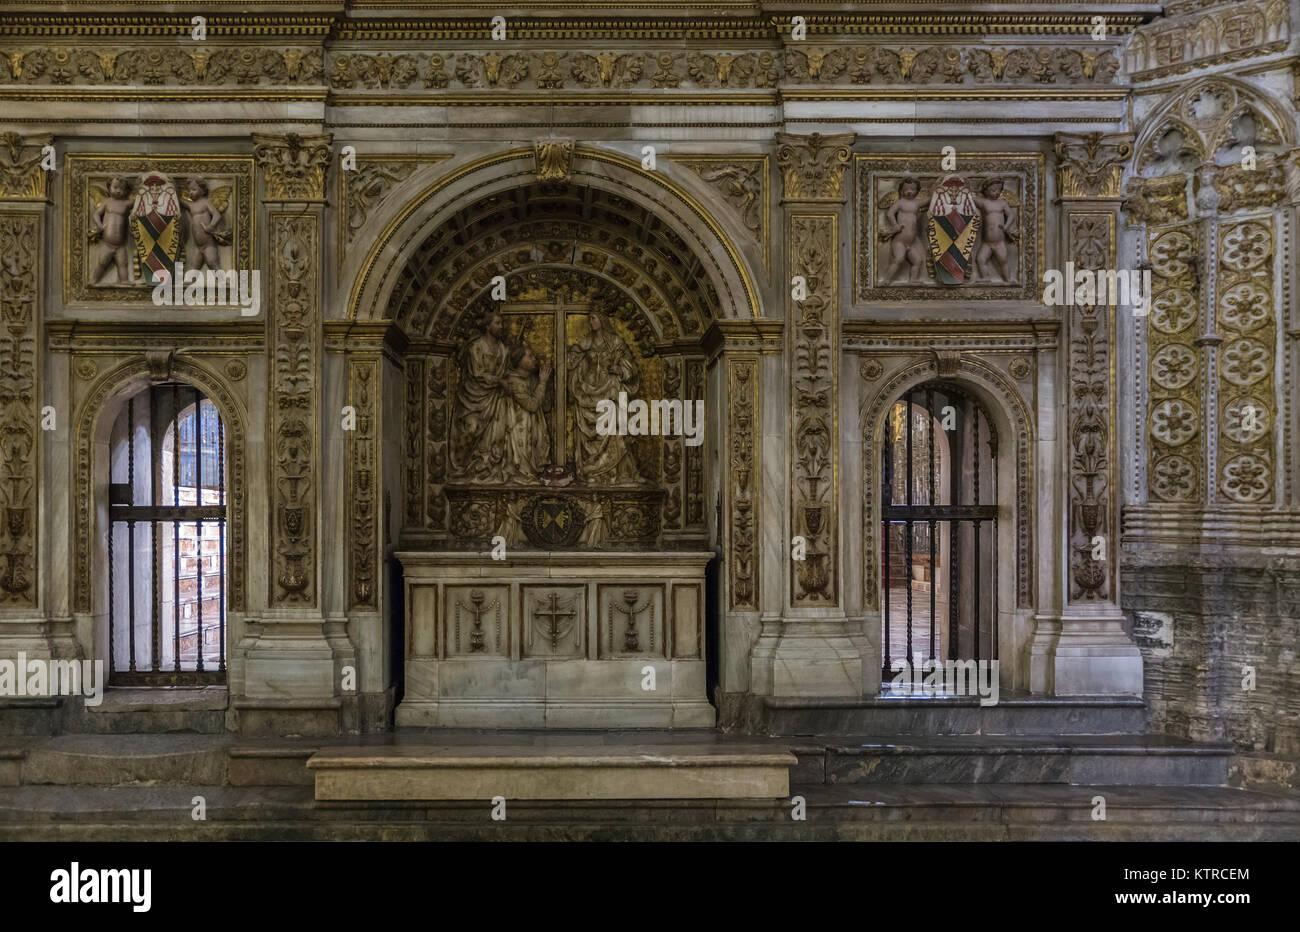 Toledo. Spain. - January 28, 2014: Small altar. Chapel located inside the Cathedral in Toledo. Spain. Stock Photo